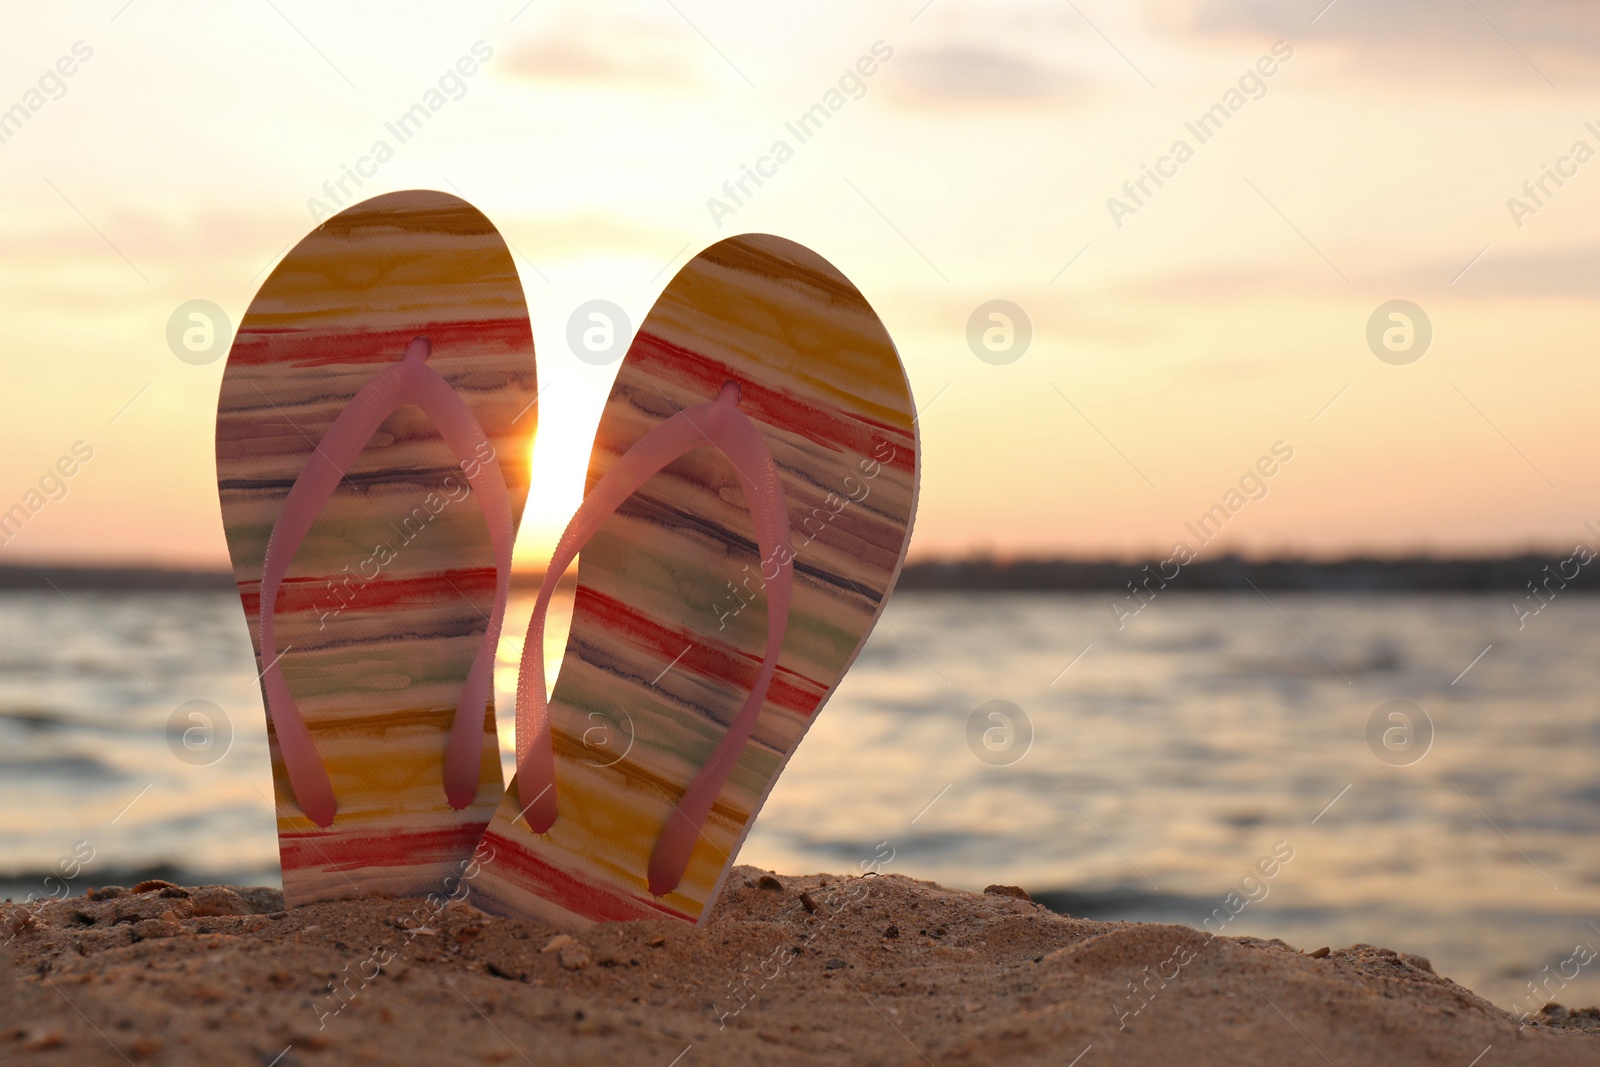 Photo of Stylish flip flops on sand near sea, space for text. Beach accessories